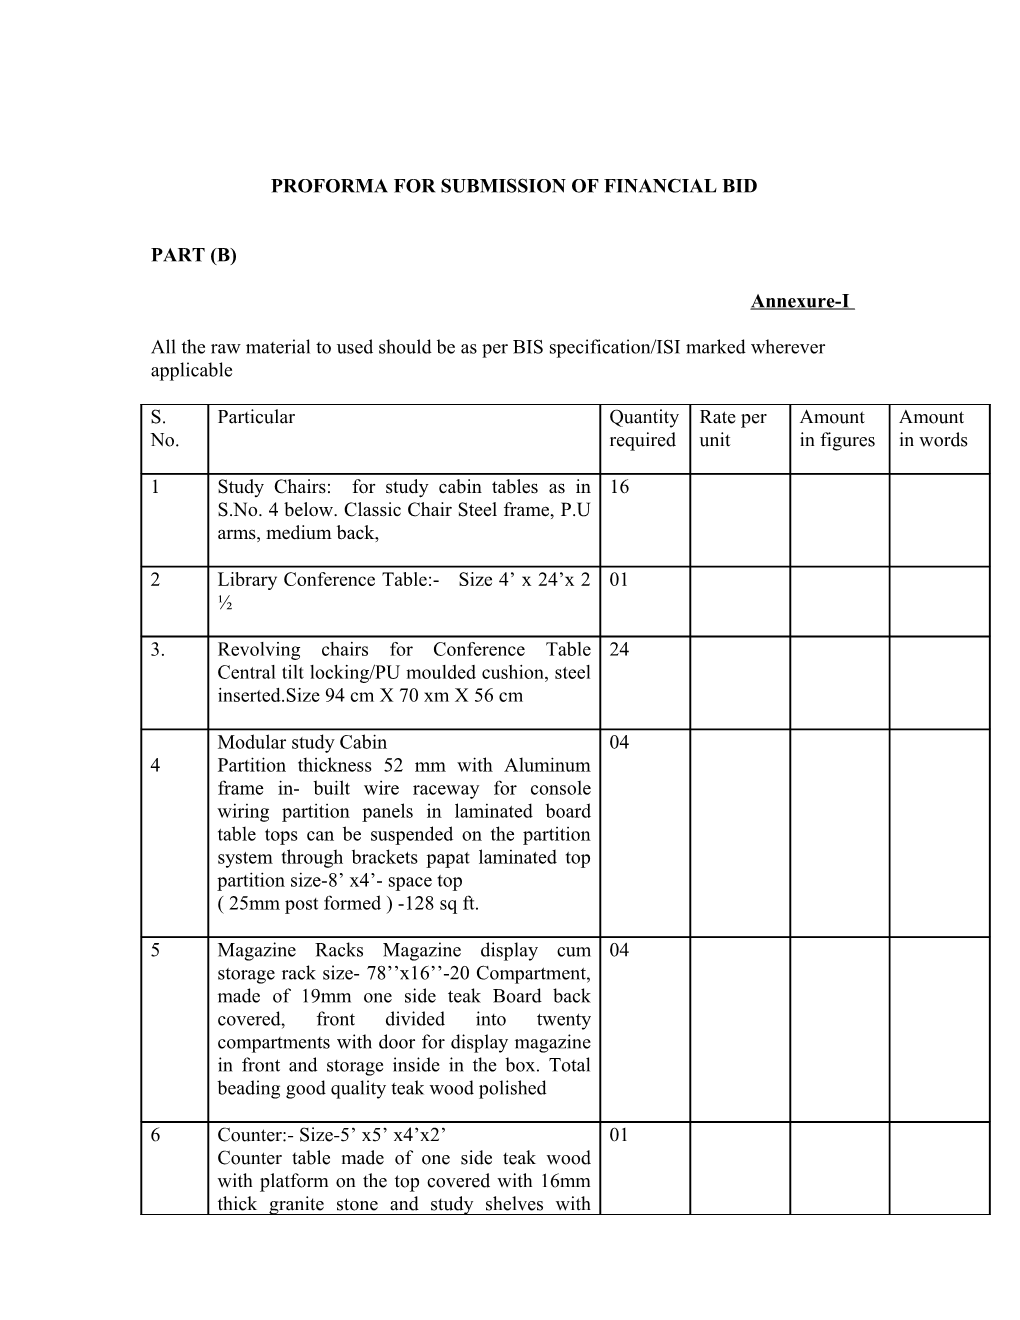 Proforma for Submission of Financial Bid